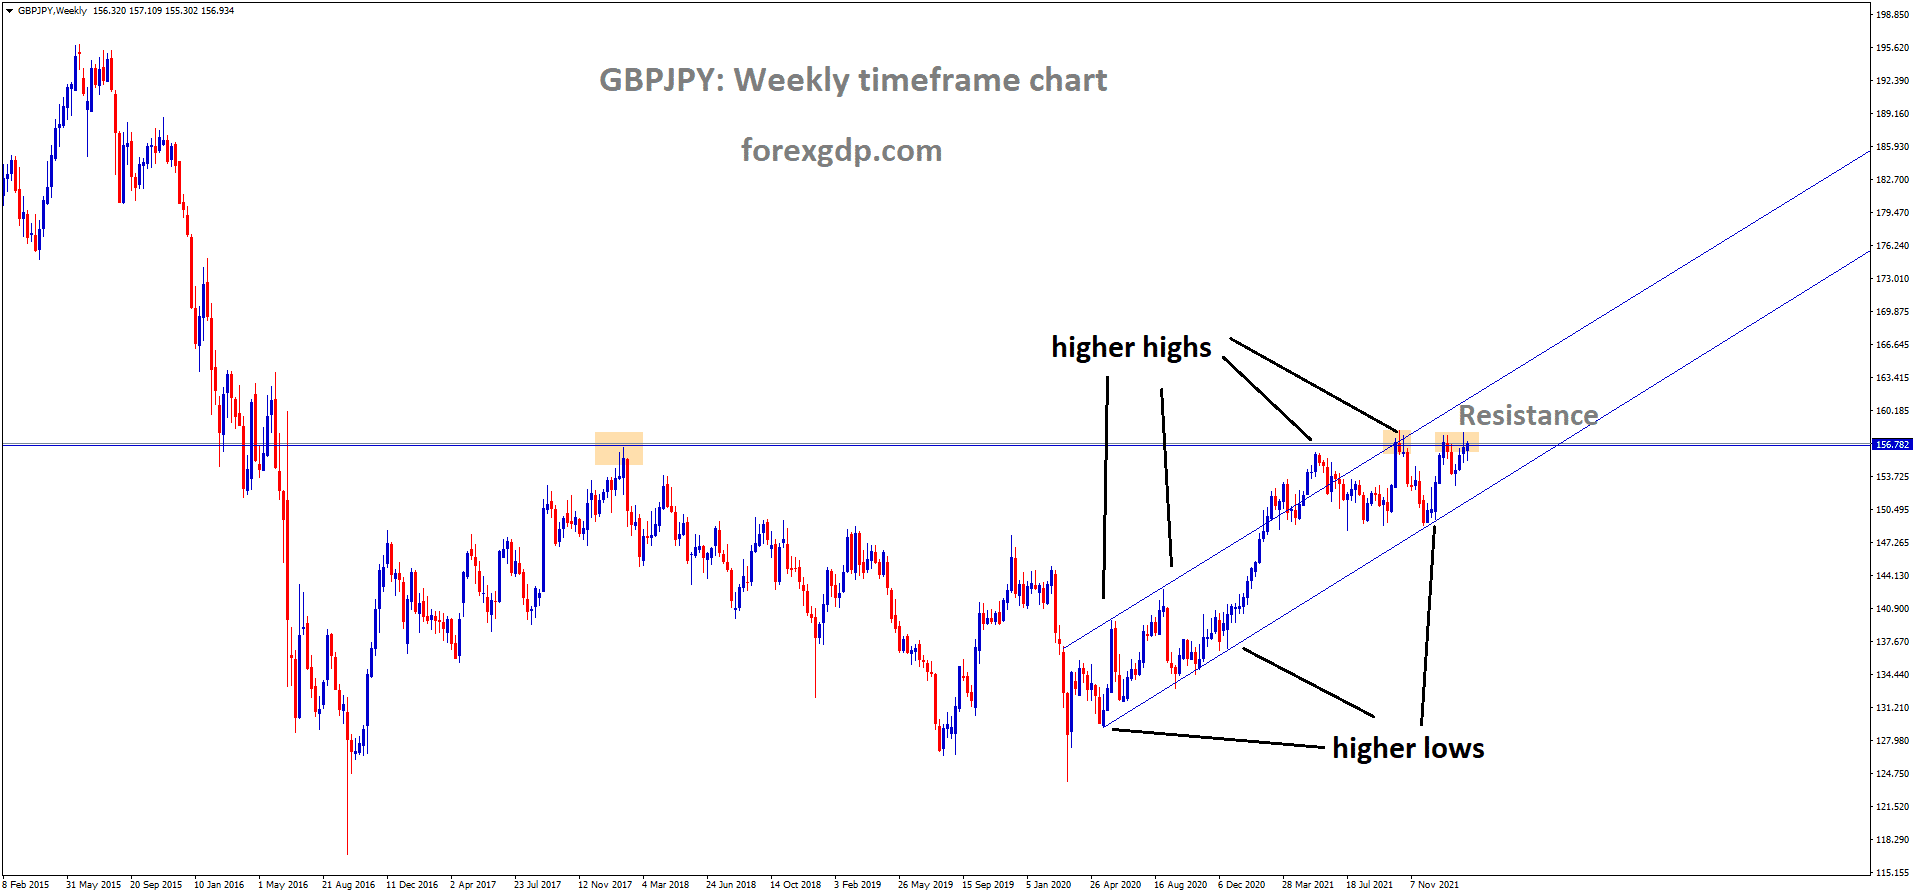 GBPJPY is moving in an Ascending channel and the market has reached the Resistance area of the Channel.